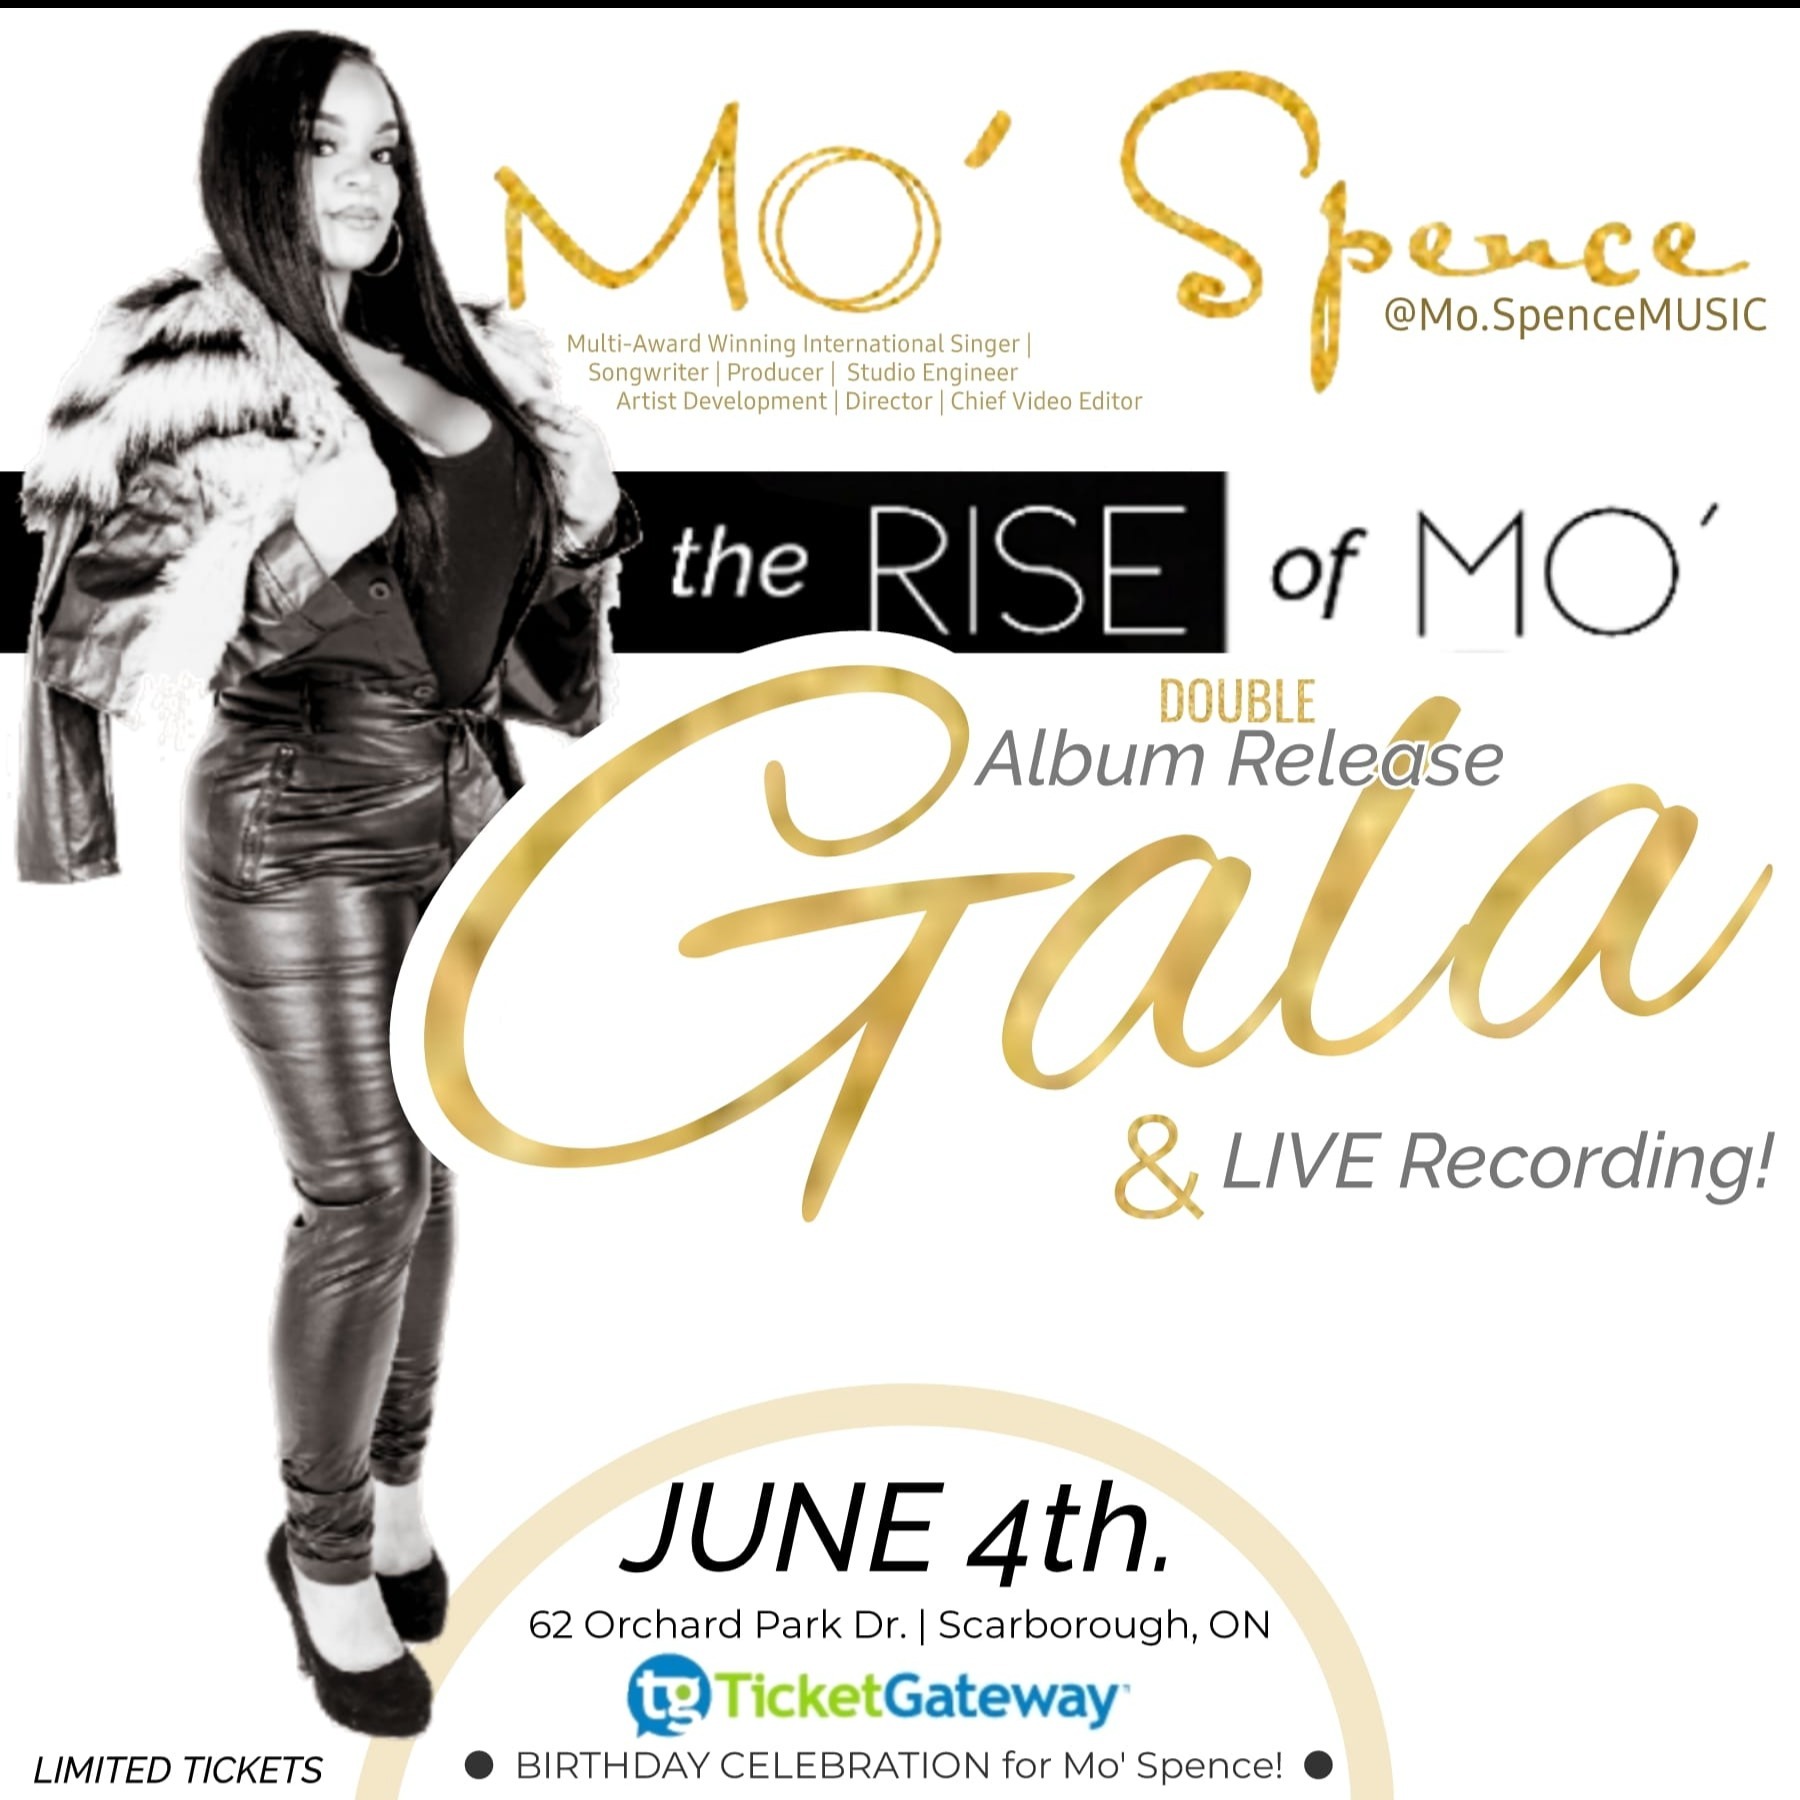 The Rise Of Mo' Double Album Release Gala